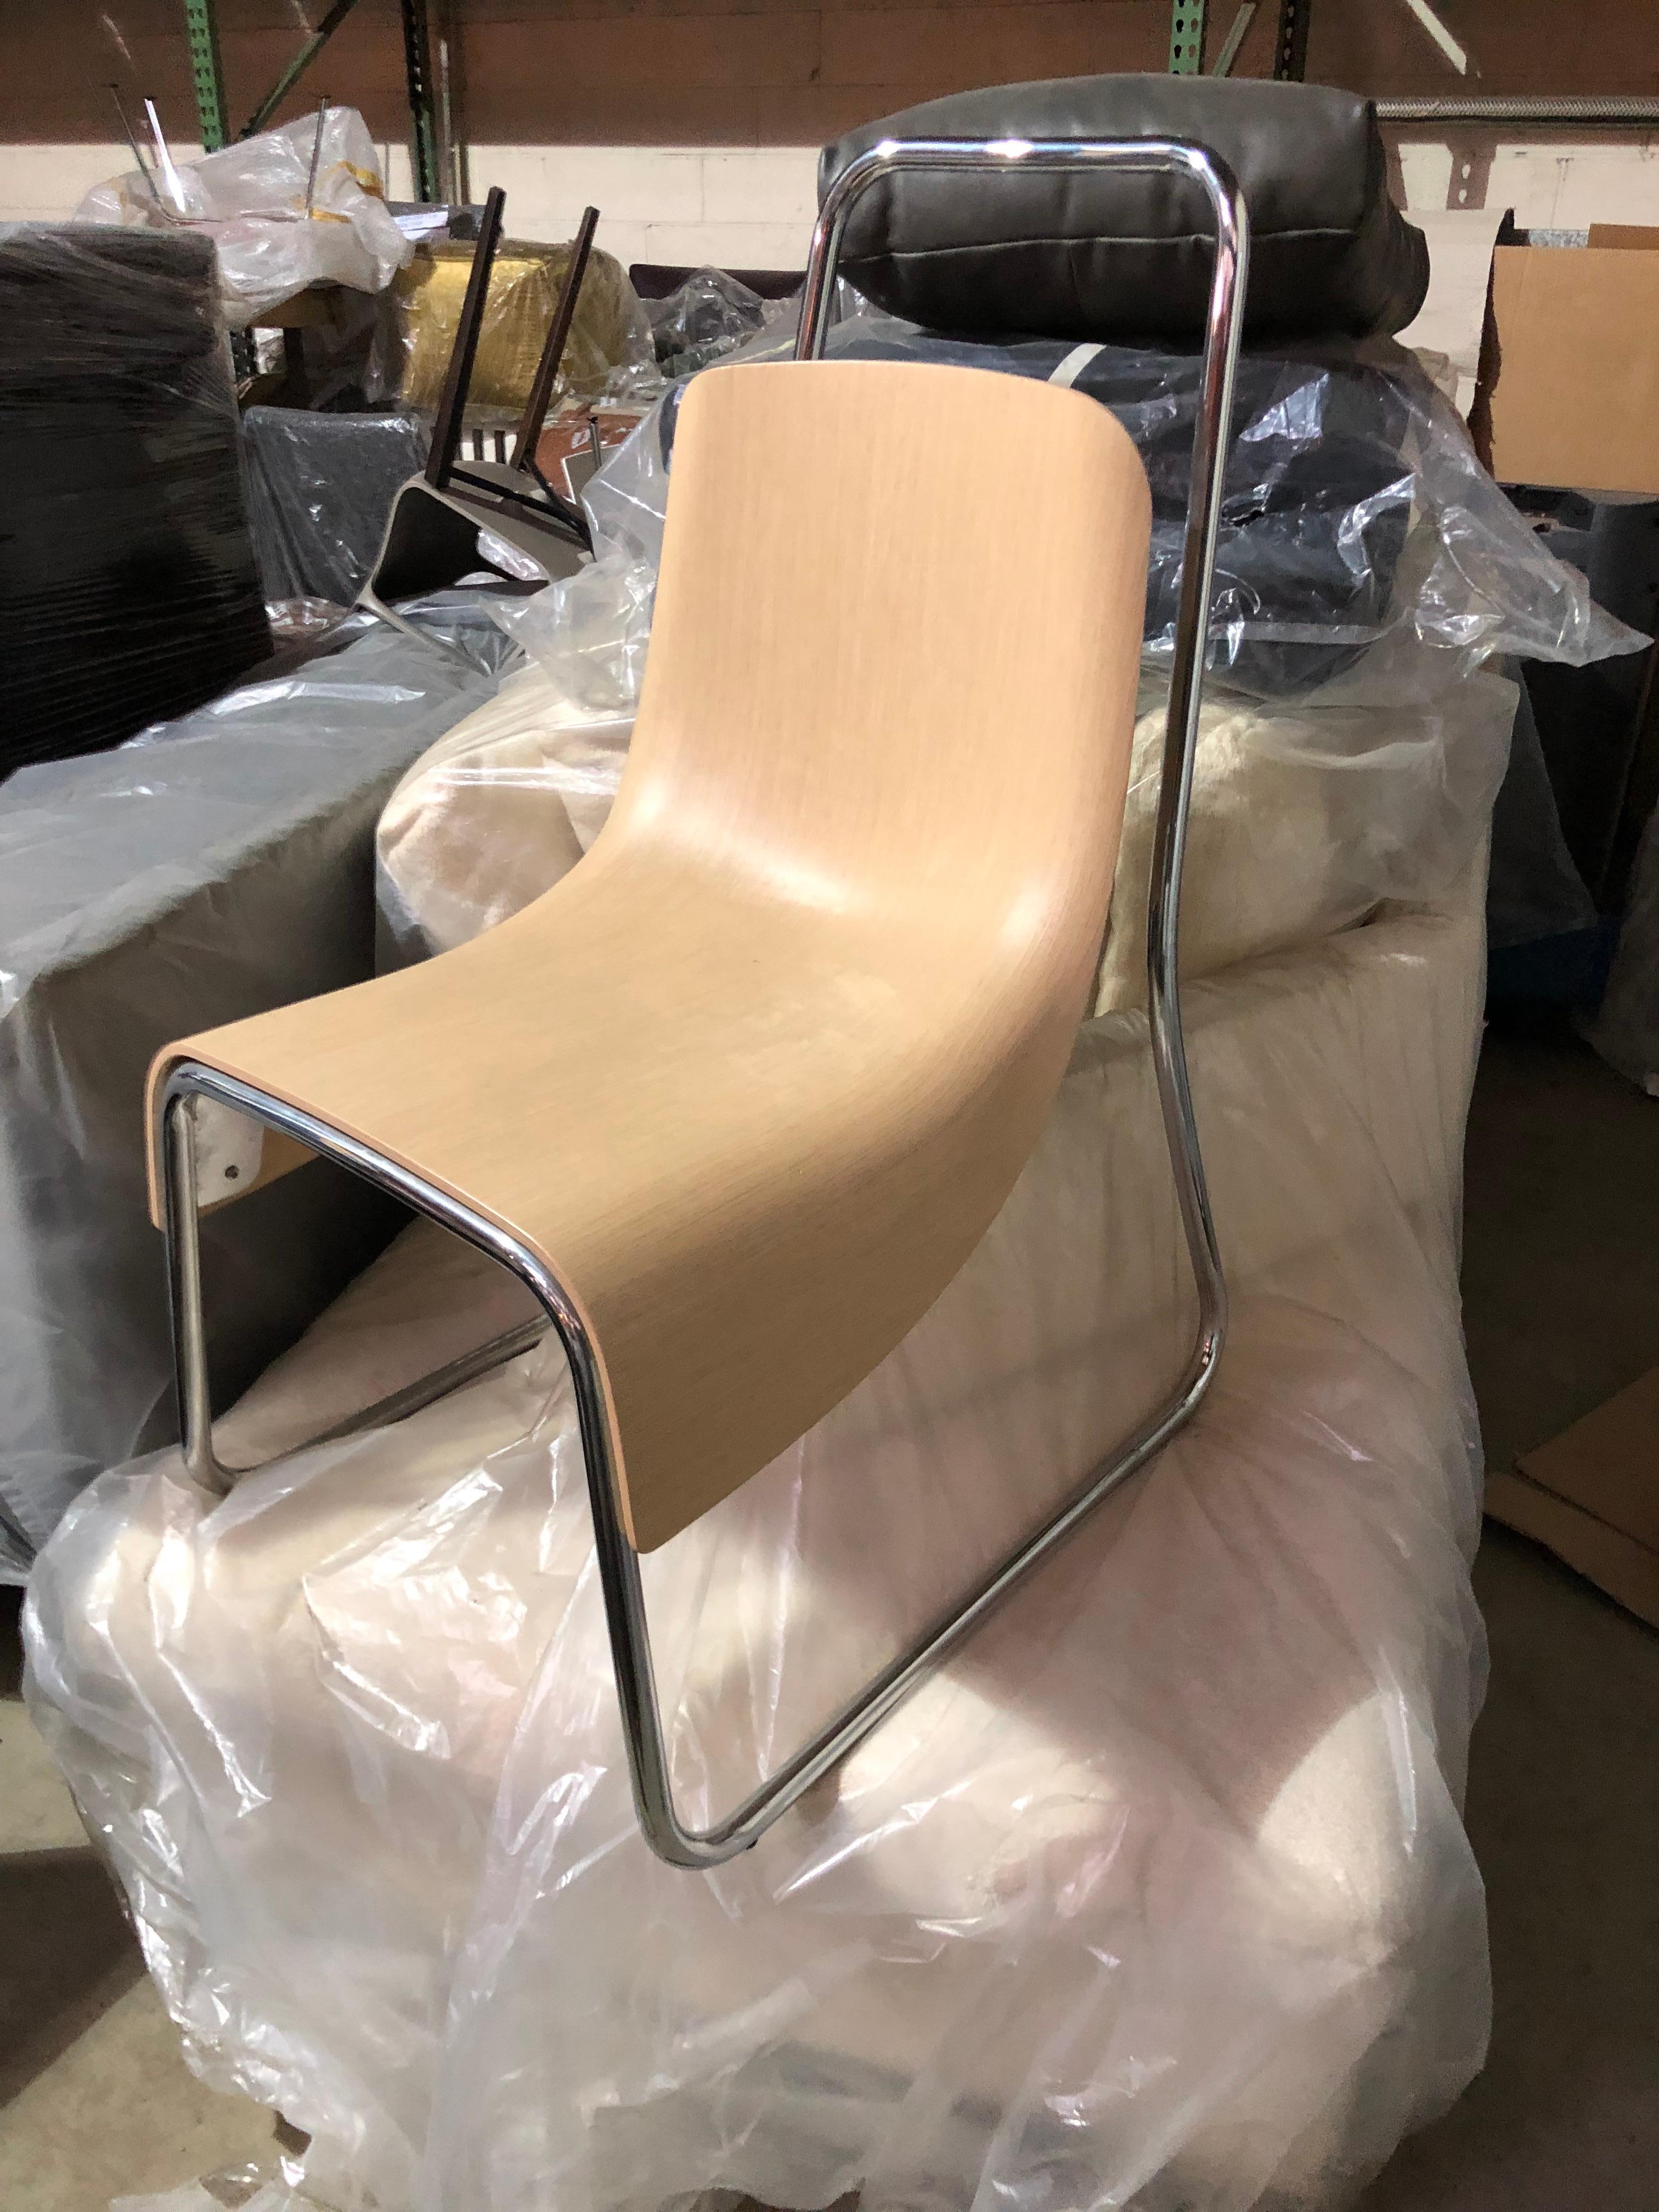 The Littlebig chair was designed by Jeff Miller in Italy. An artistic and brilliantly designed chair that has a structure and frame made of polished aluminum and a 3D curved seat made of oak veneer. There is magic in this surprising evolution of the